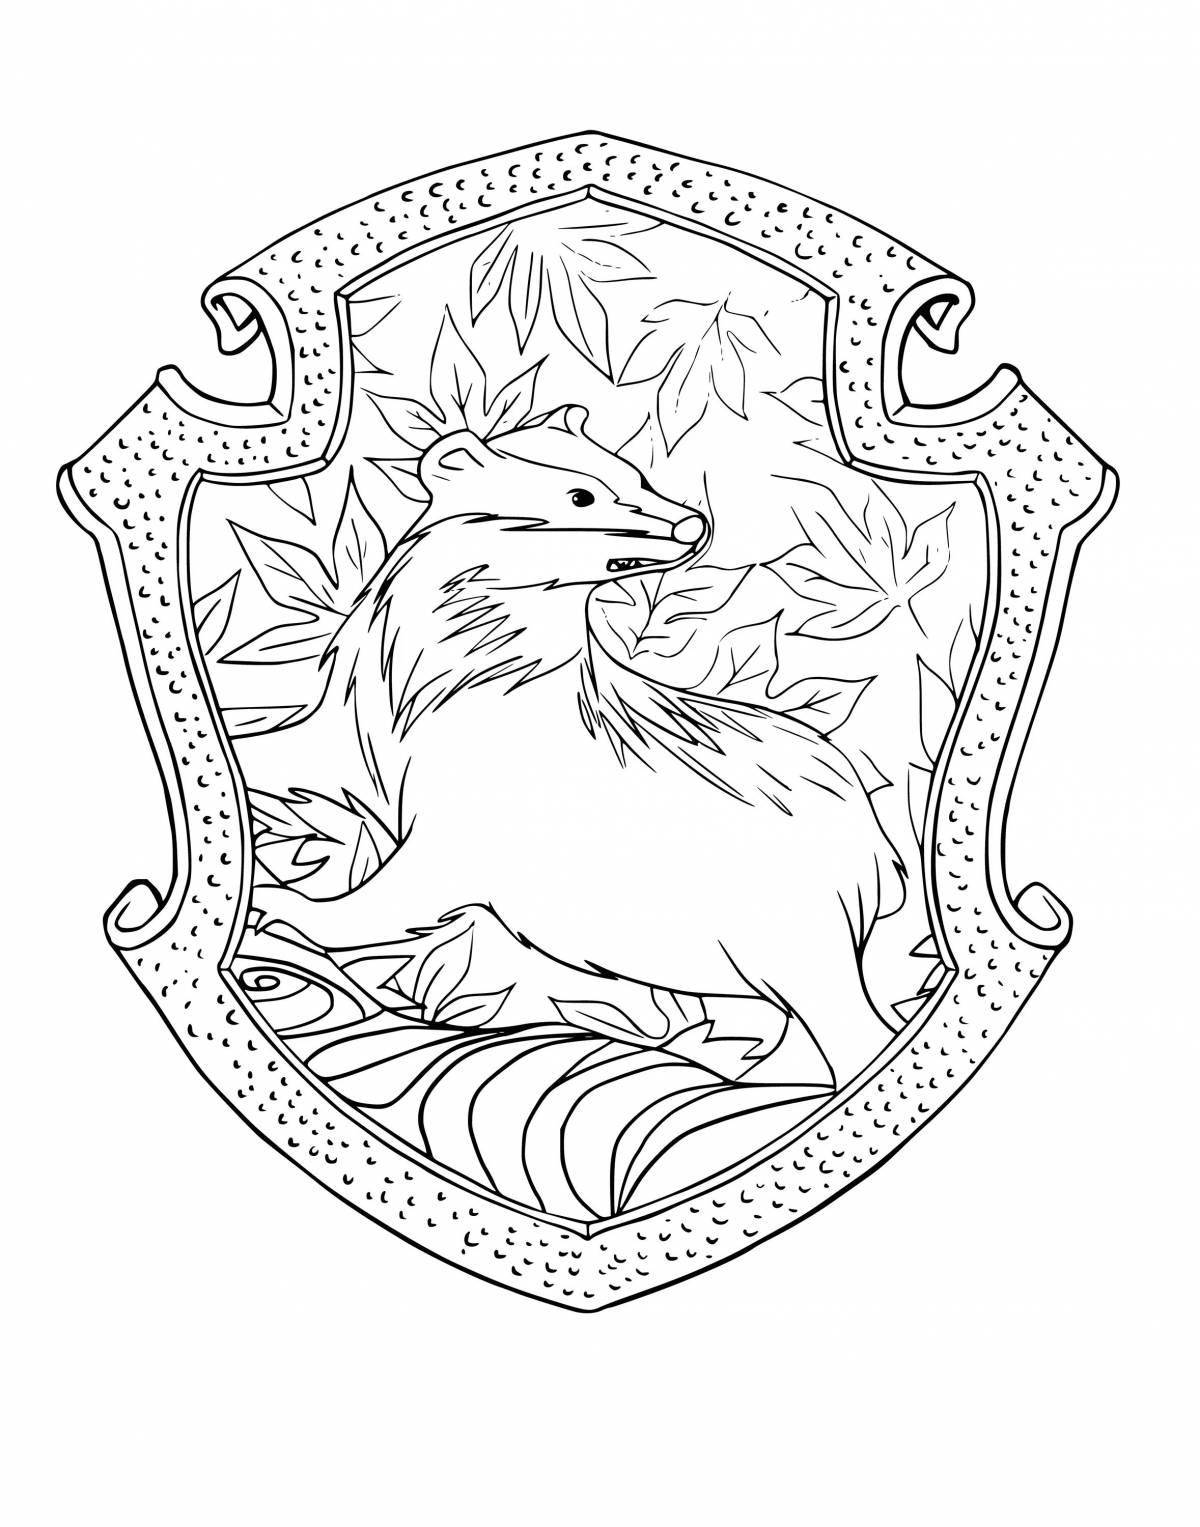 Delightful ravenclaw coloring book